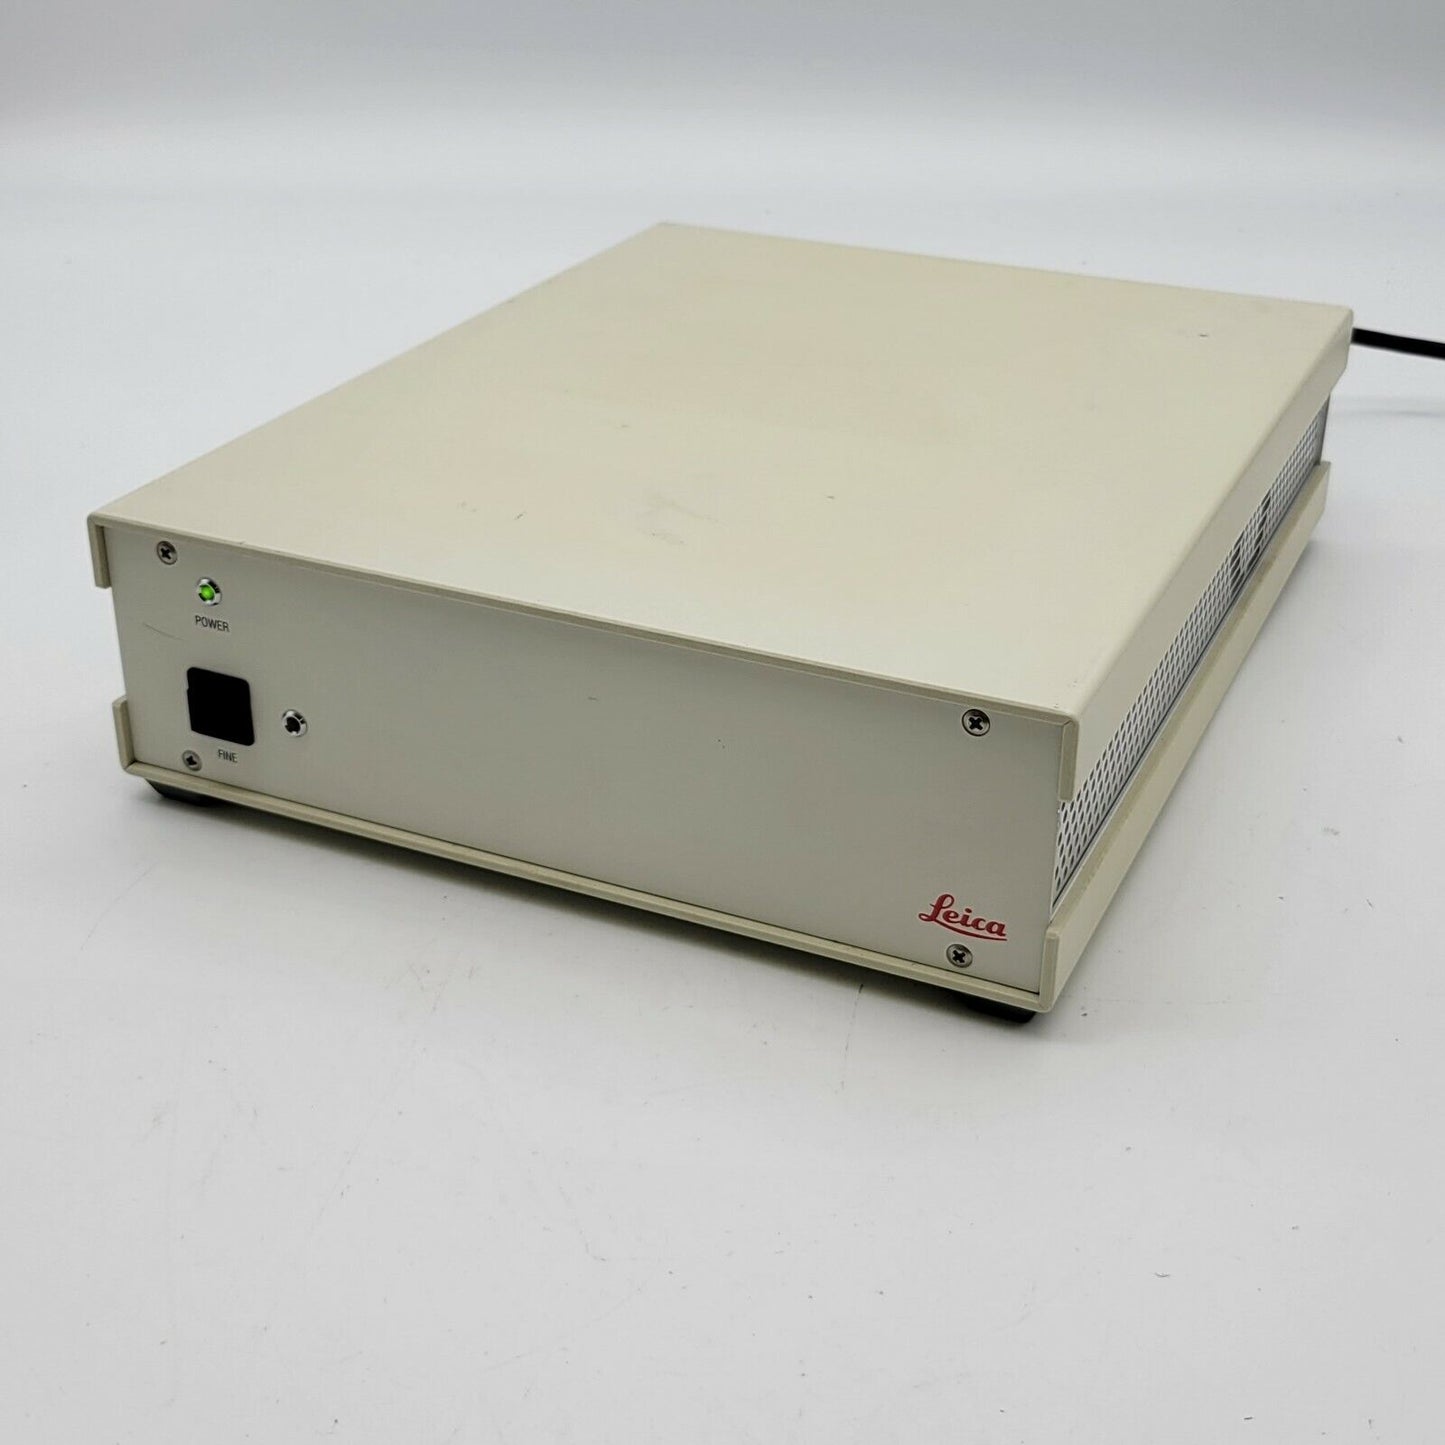 Leica Microscope DMSTC Controller f. Motorized Stage XY Stage System - microscopemarketplace